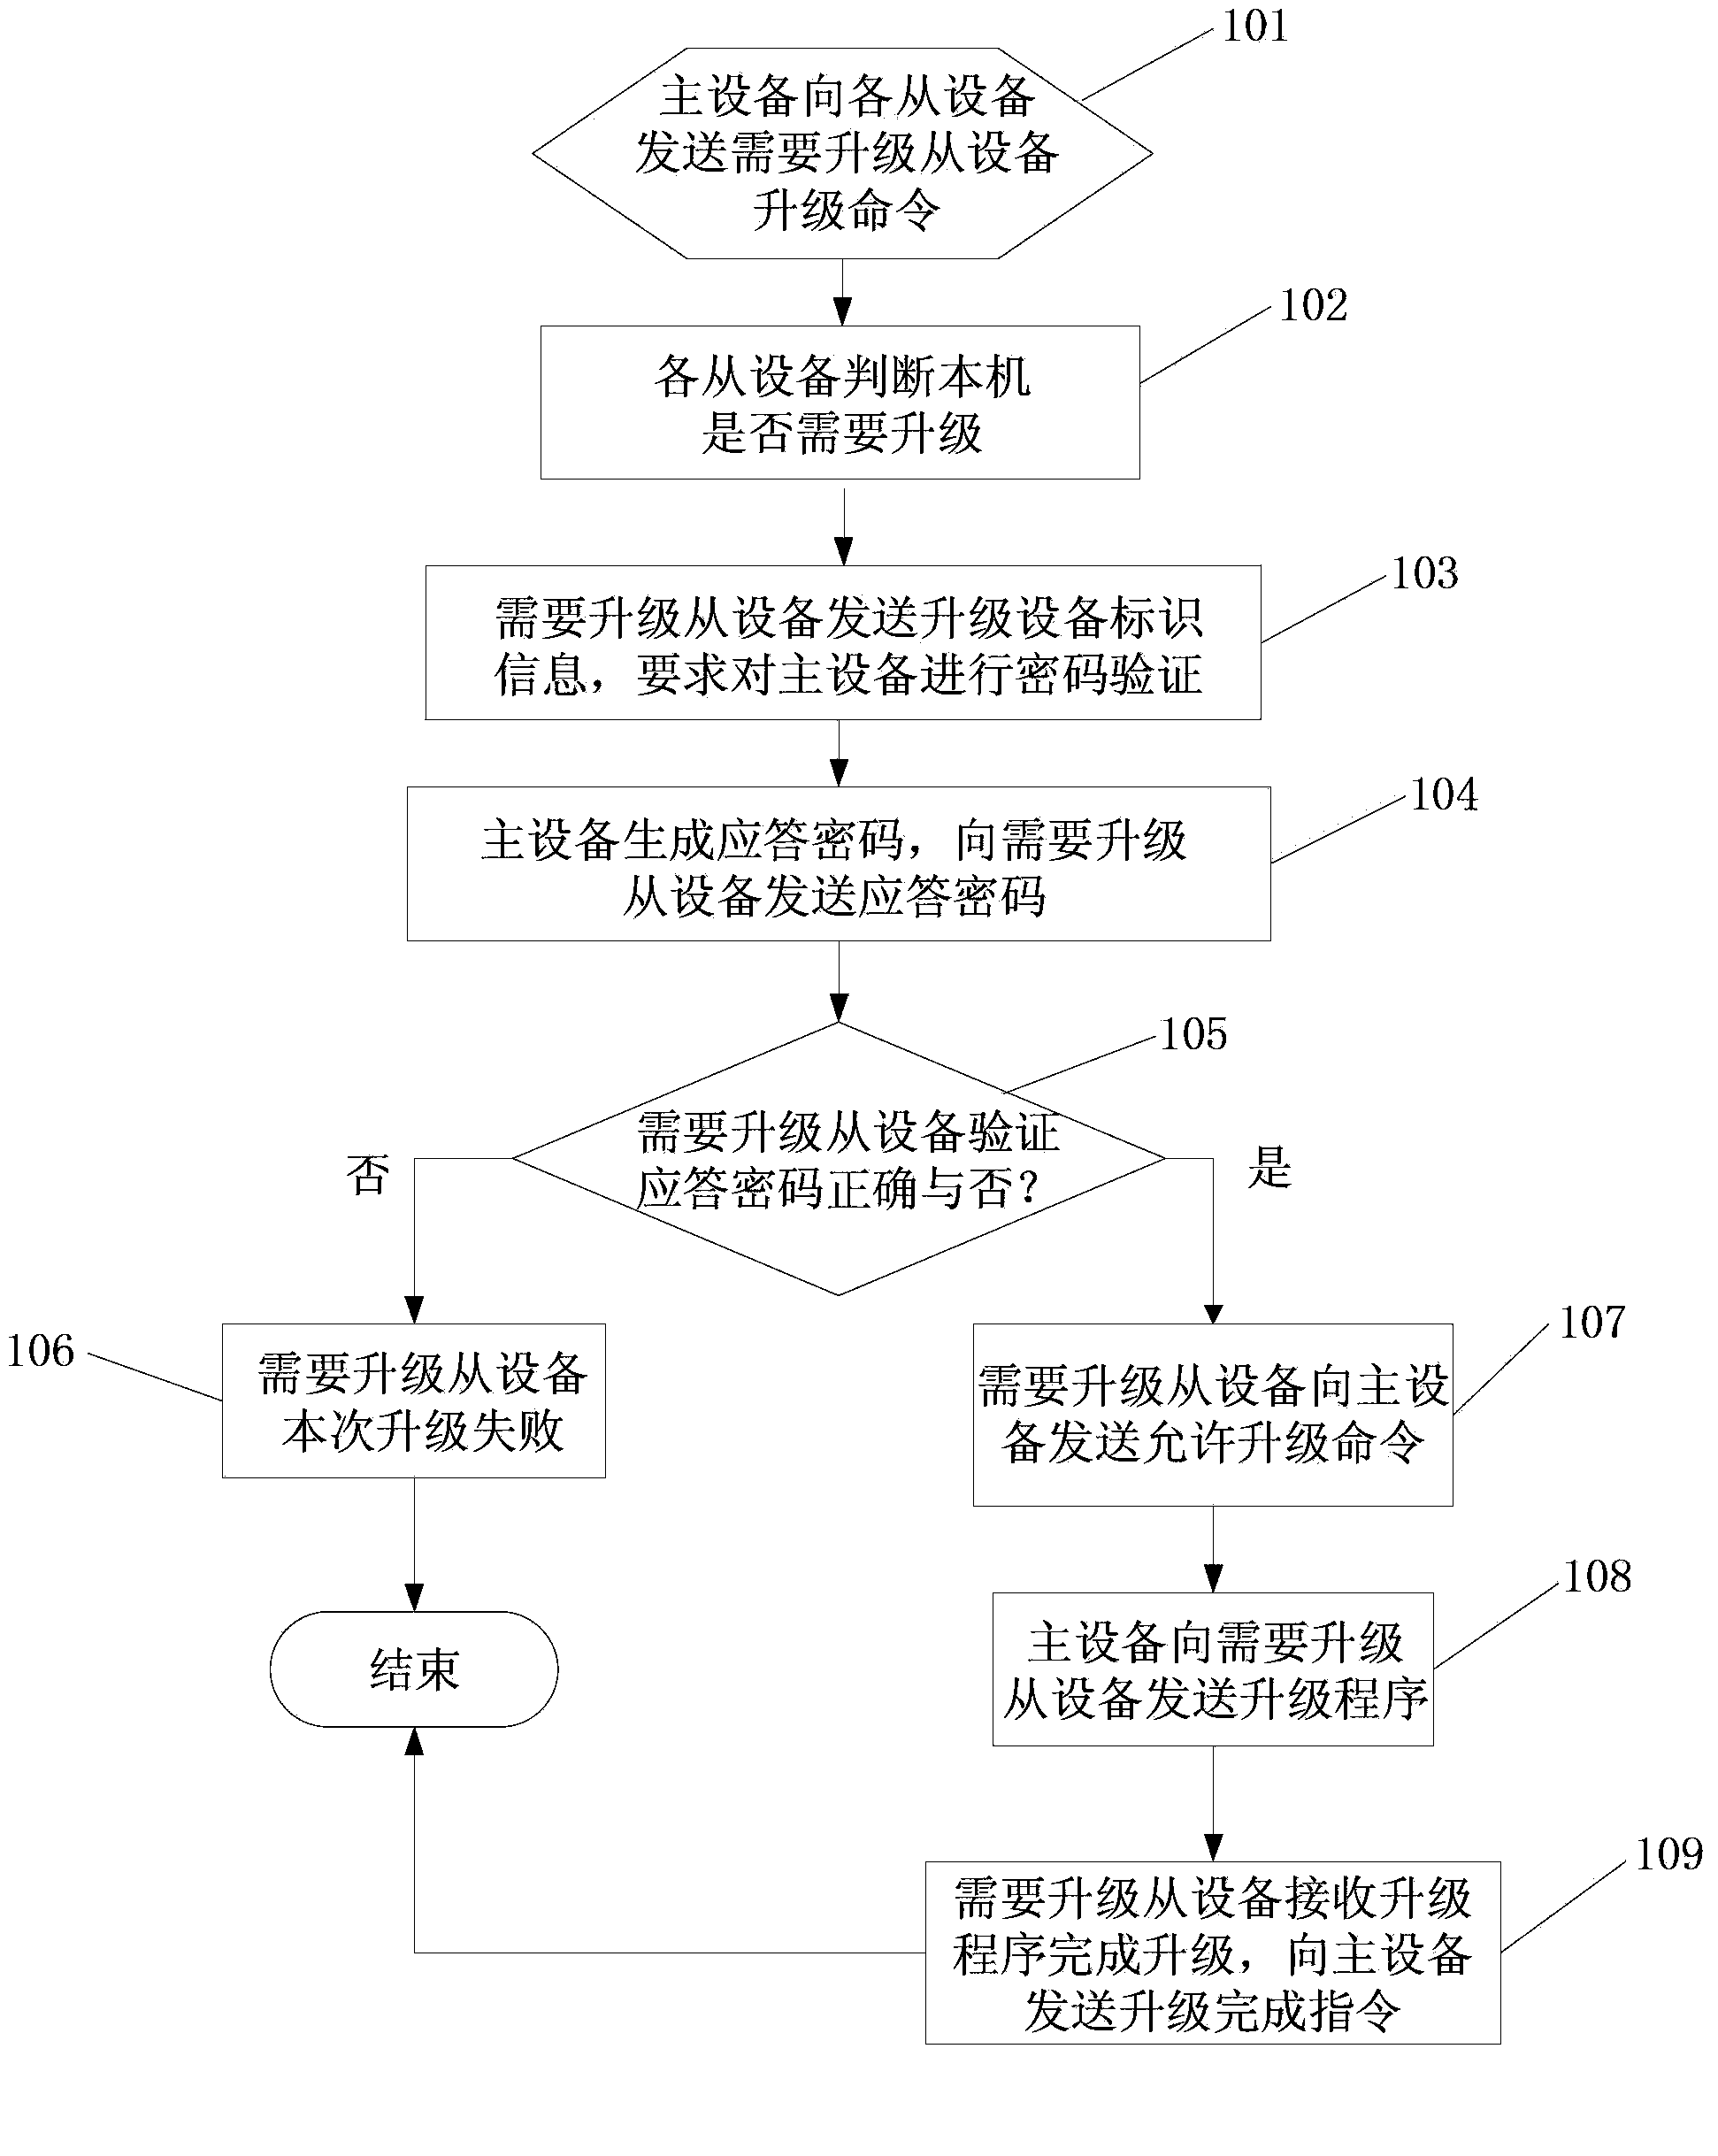 Upgrading method and device of multiple single-chip microcomputers based on serial buses